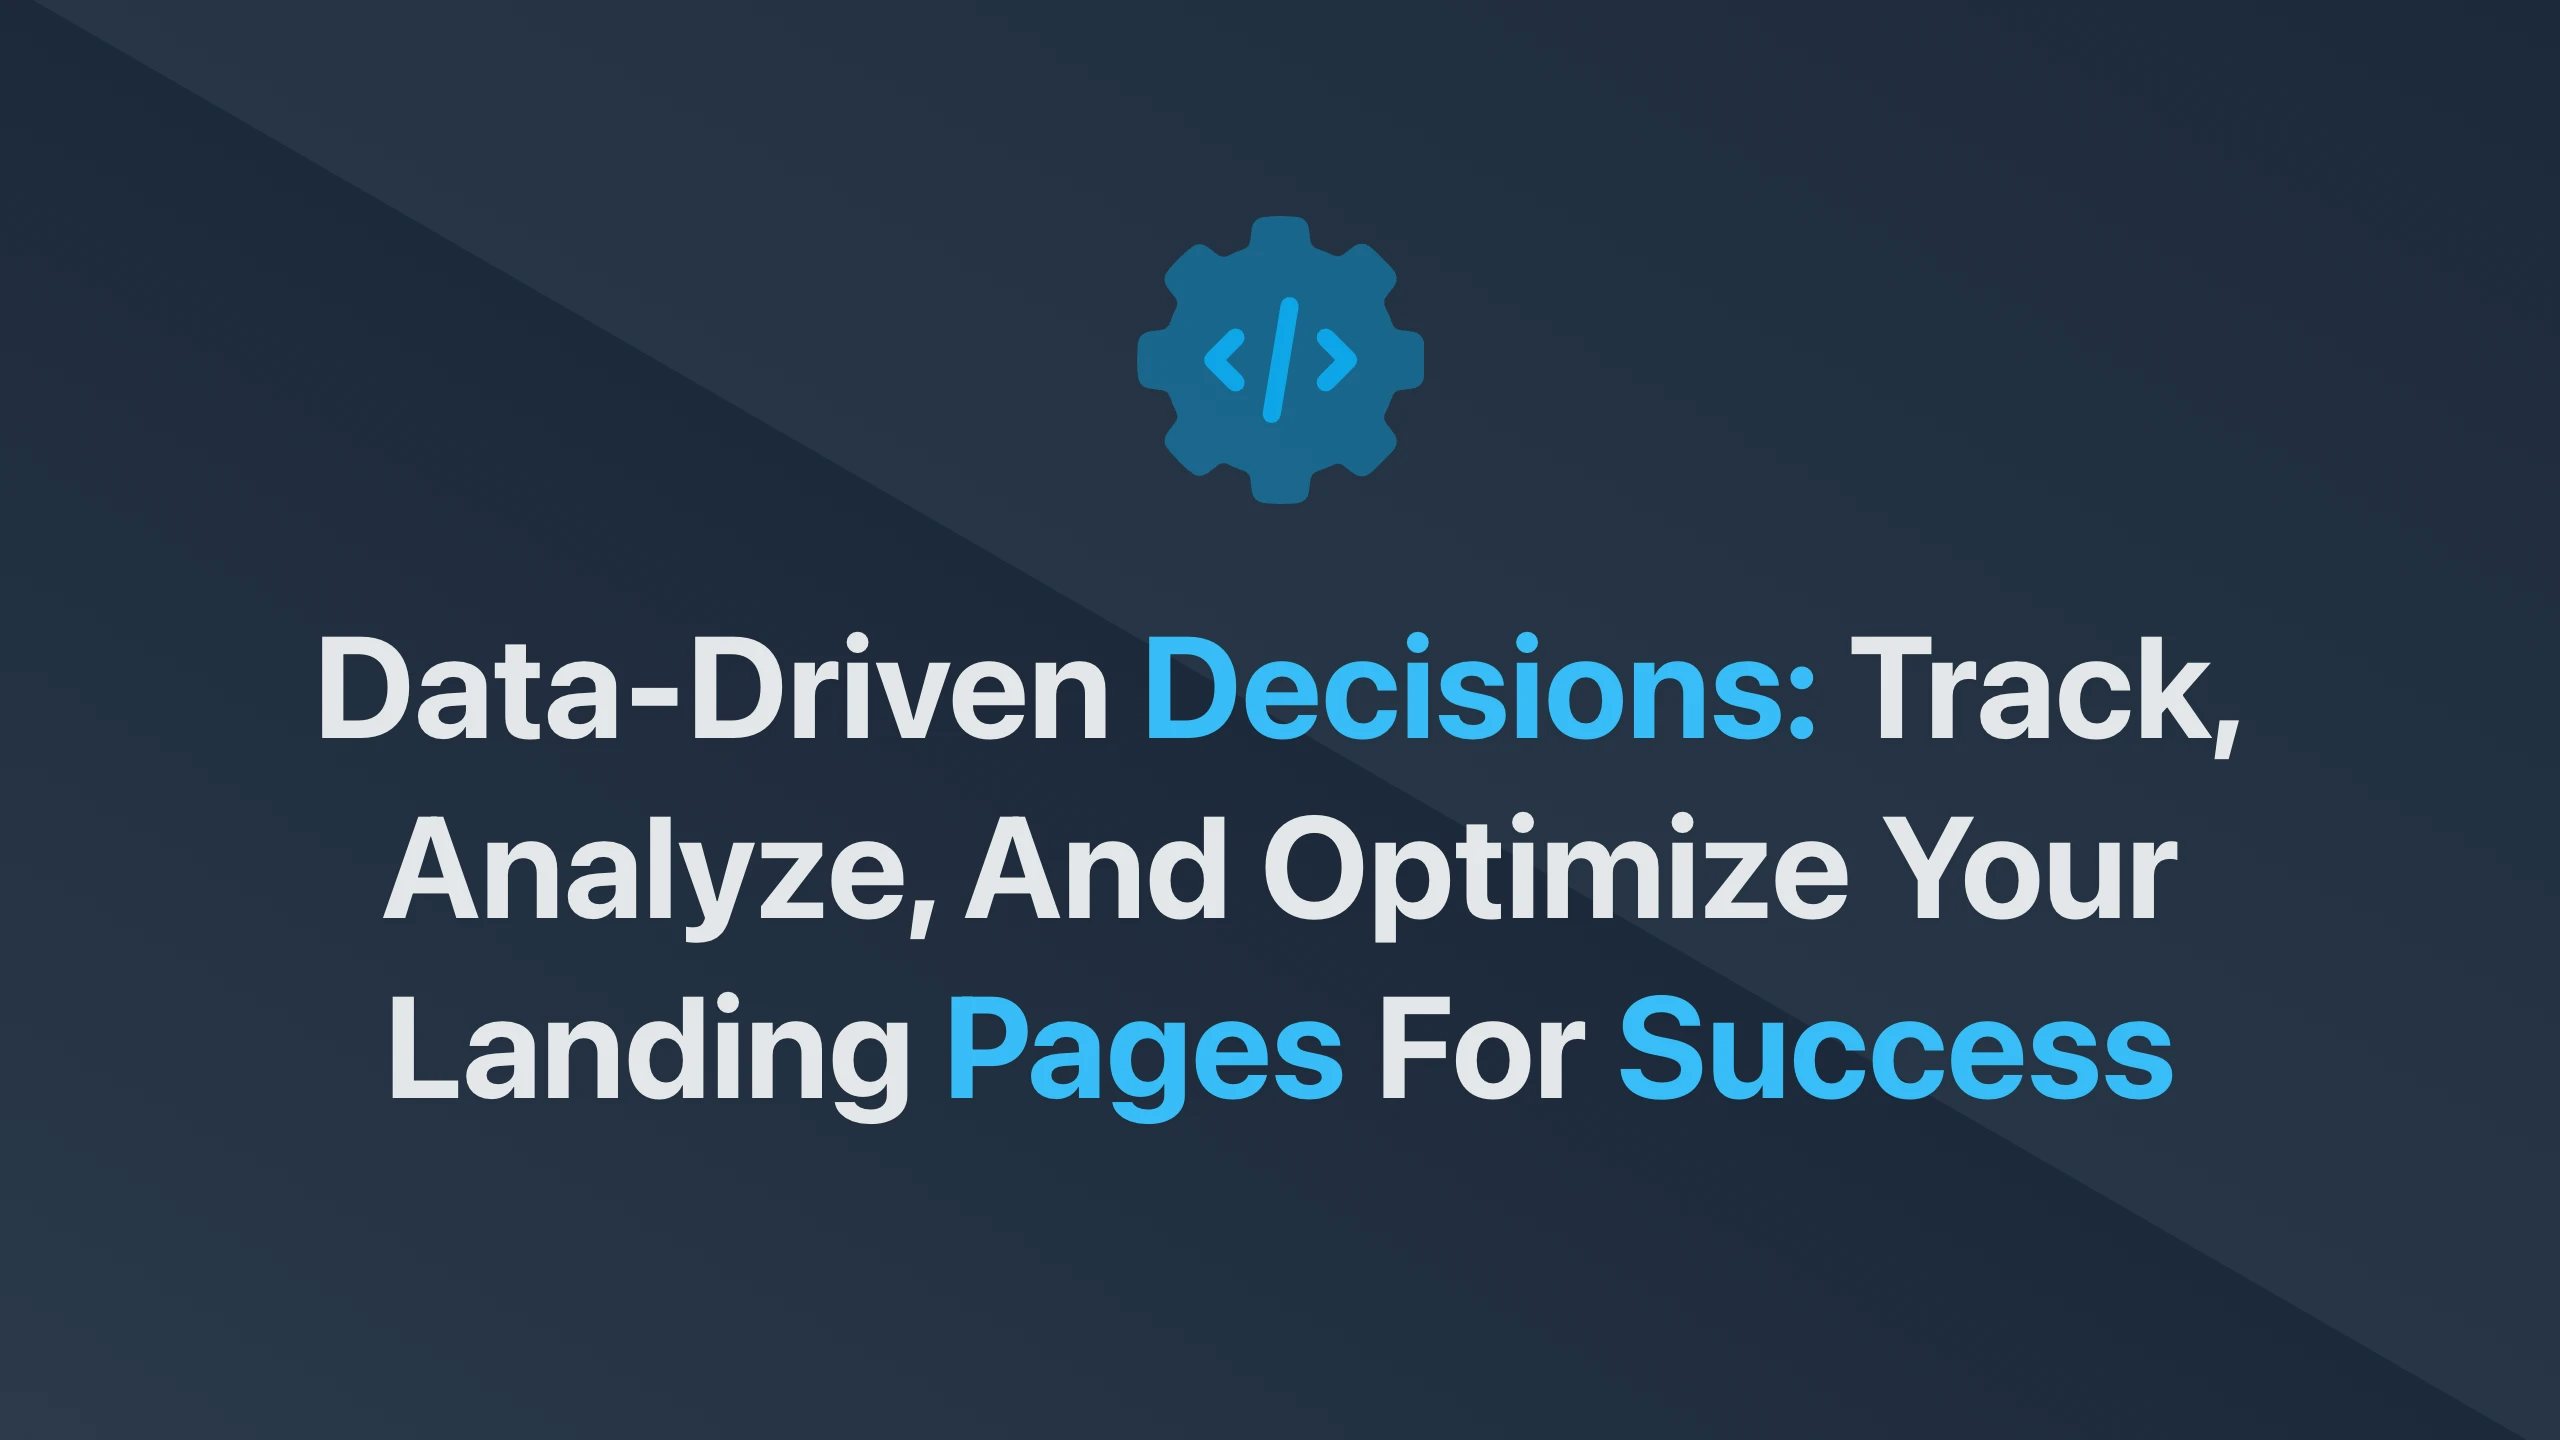 Cover Image for Data-Driven Decisions: Track, Analyze, and Optimize Your Landing Pages for Success